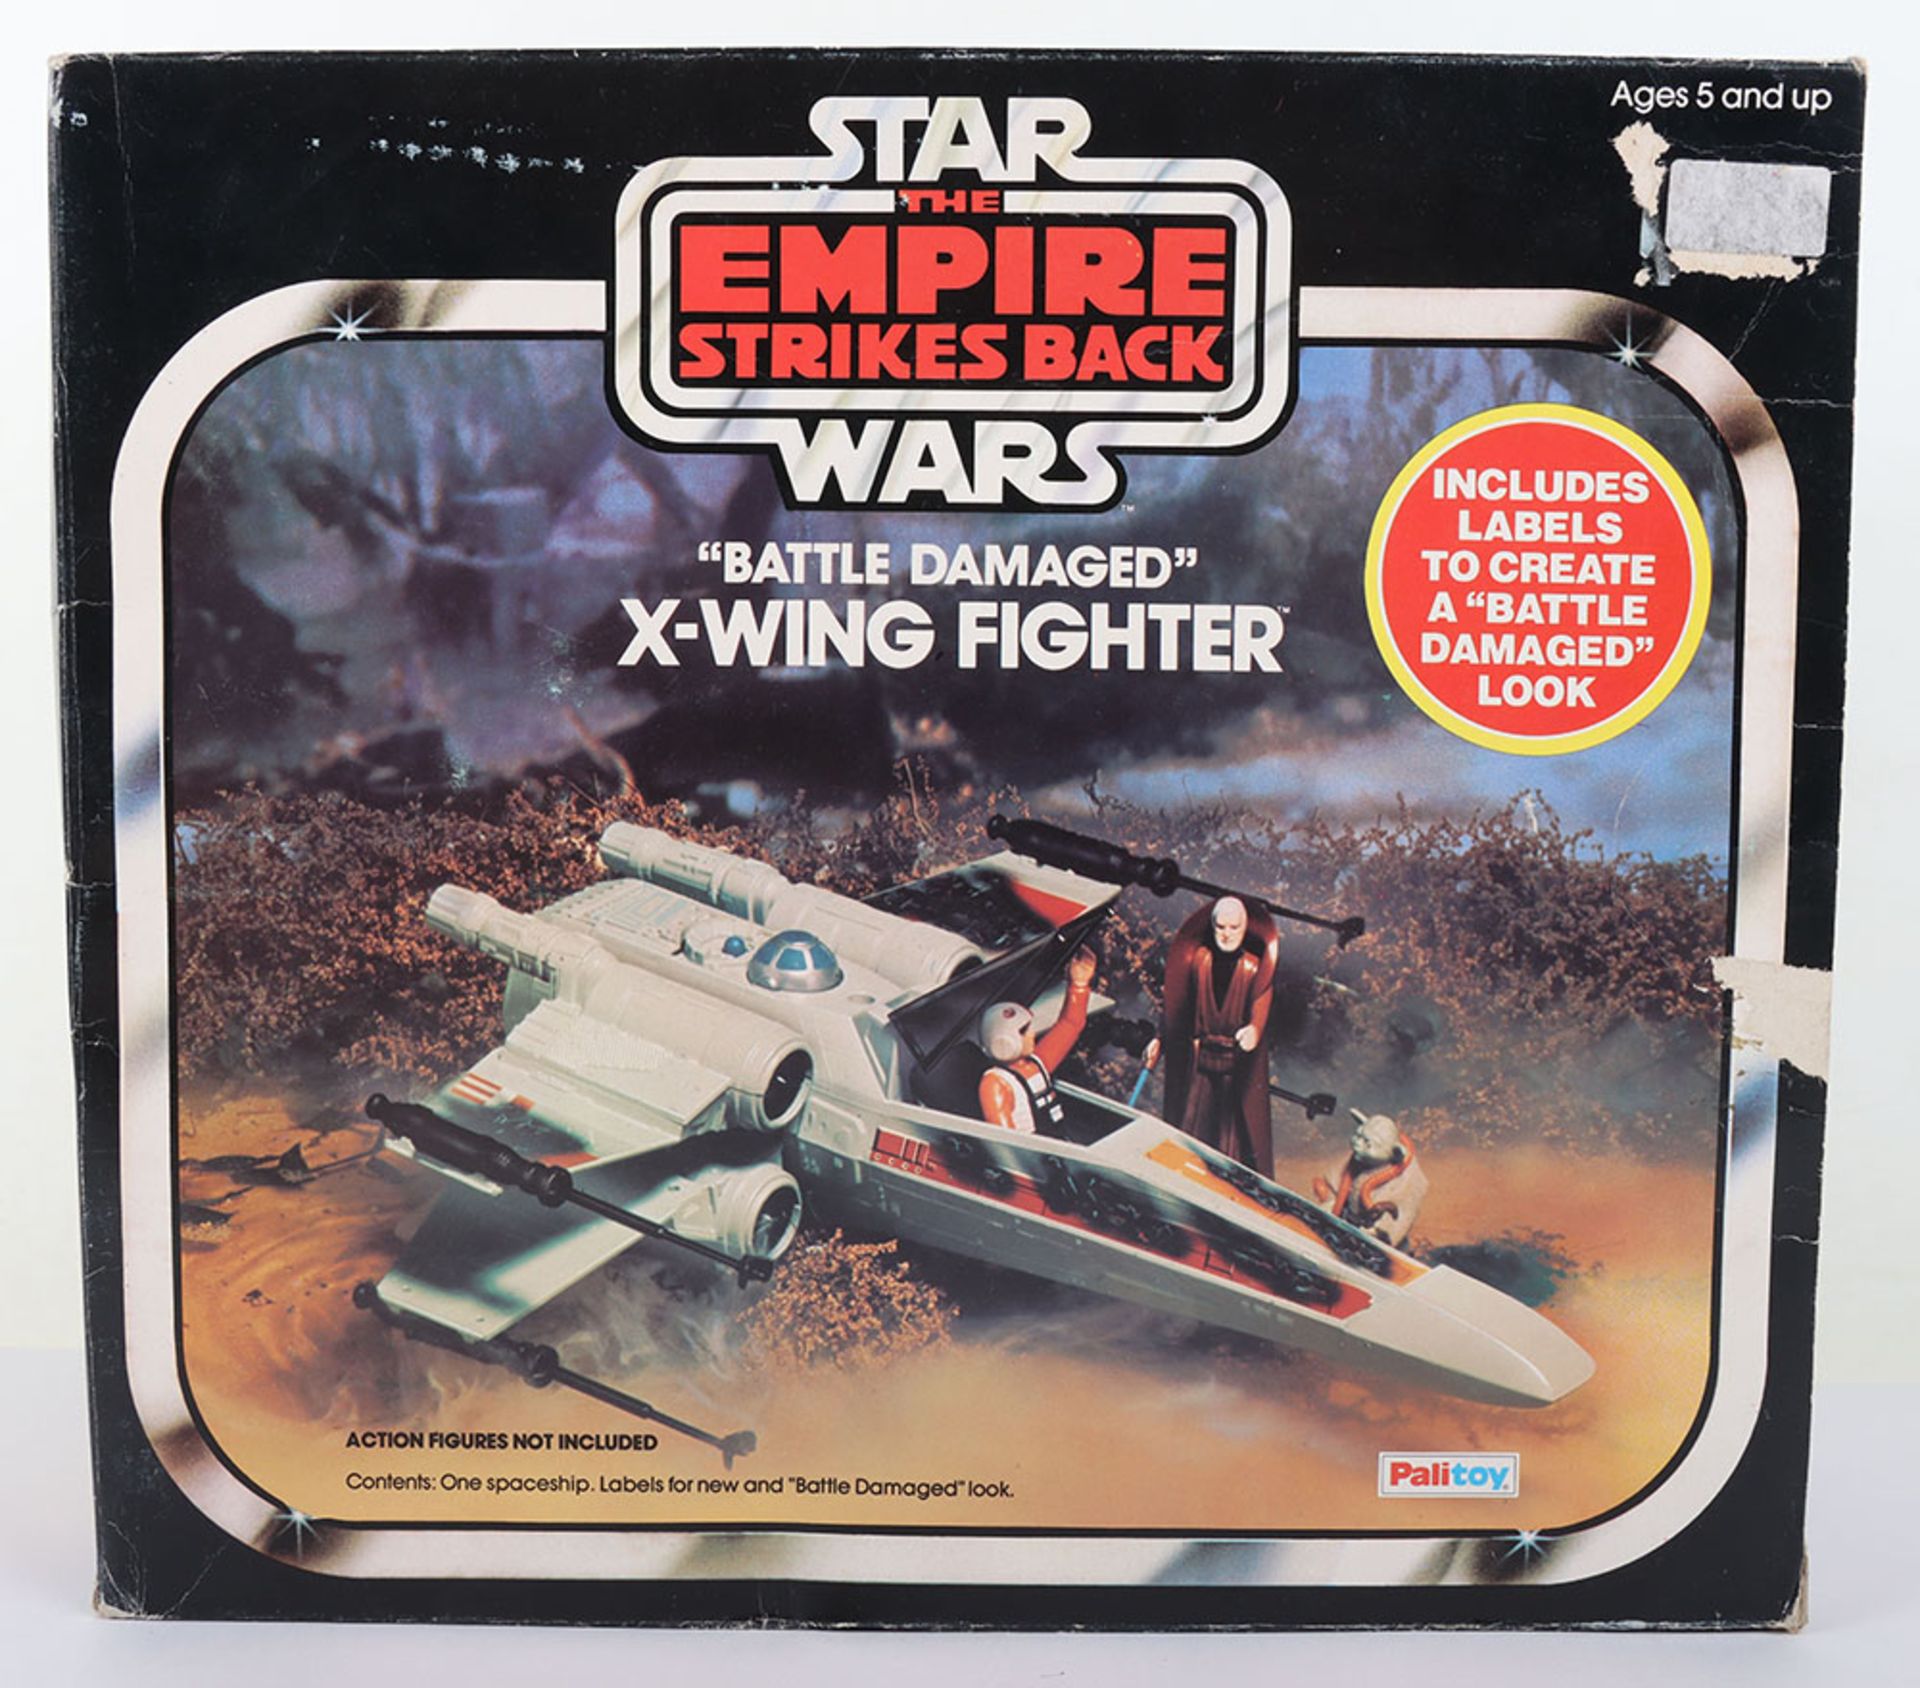 Boxed Vintage Palitoy Star Wars The Empire Strikes Back Battle Damaged X-Wing Fighter - Image 4 of 8